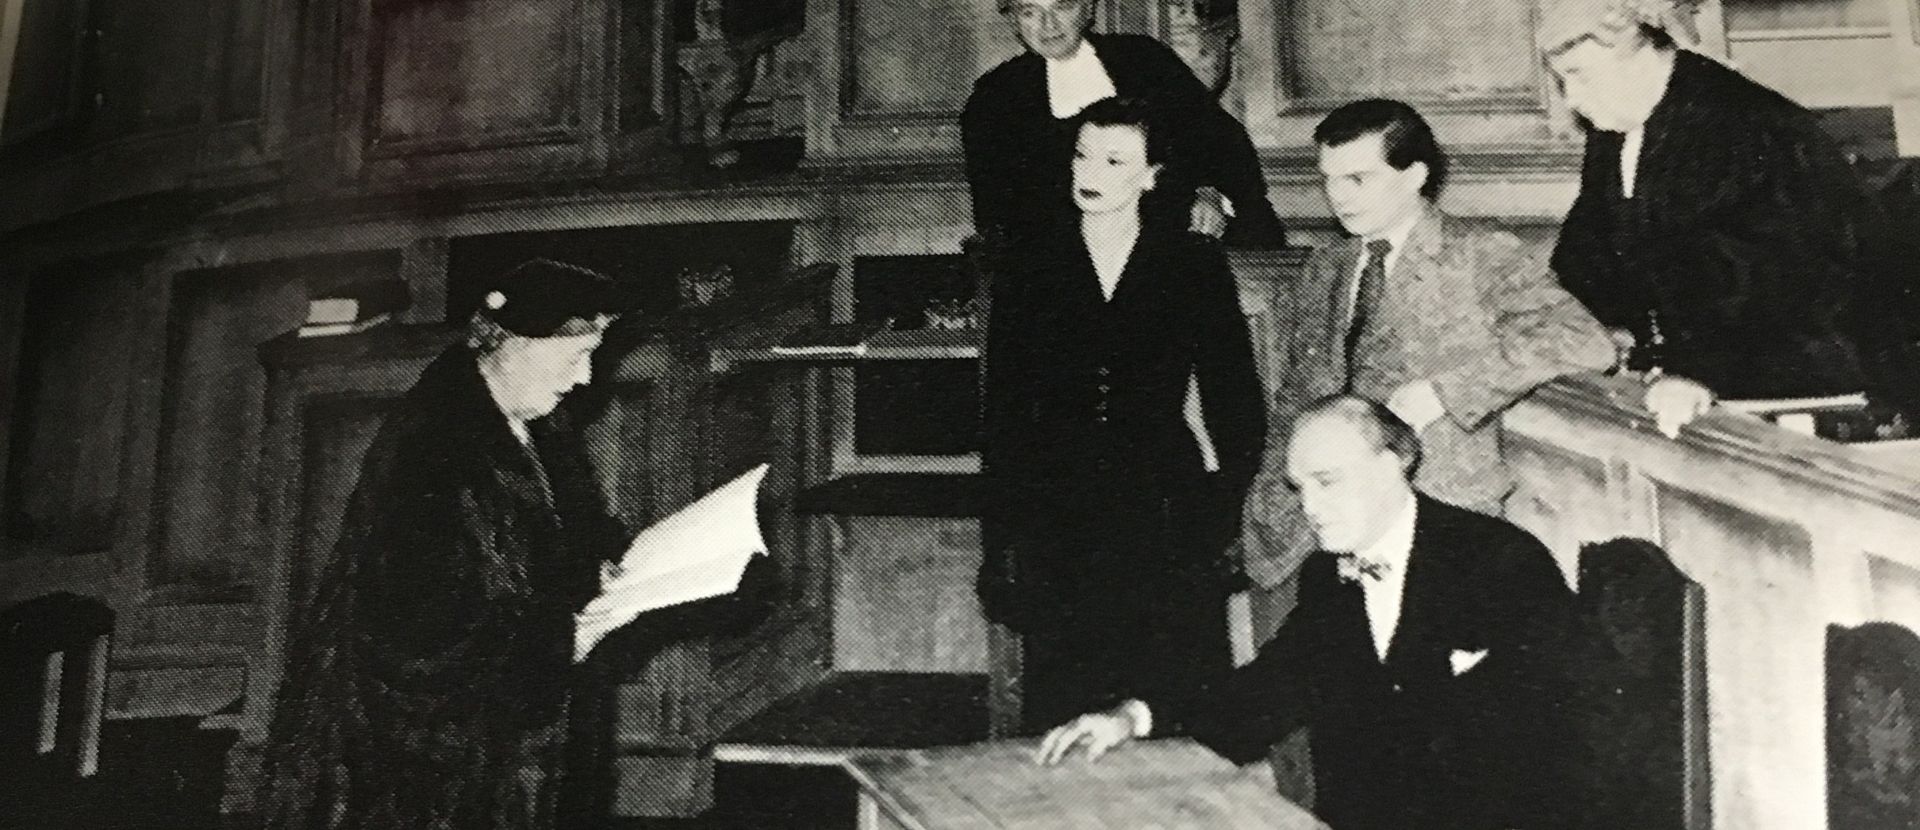 A play with people in a courtroom listening to talks.